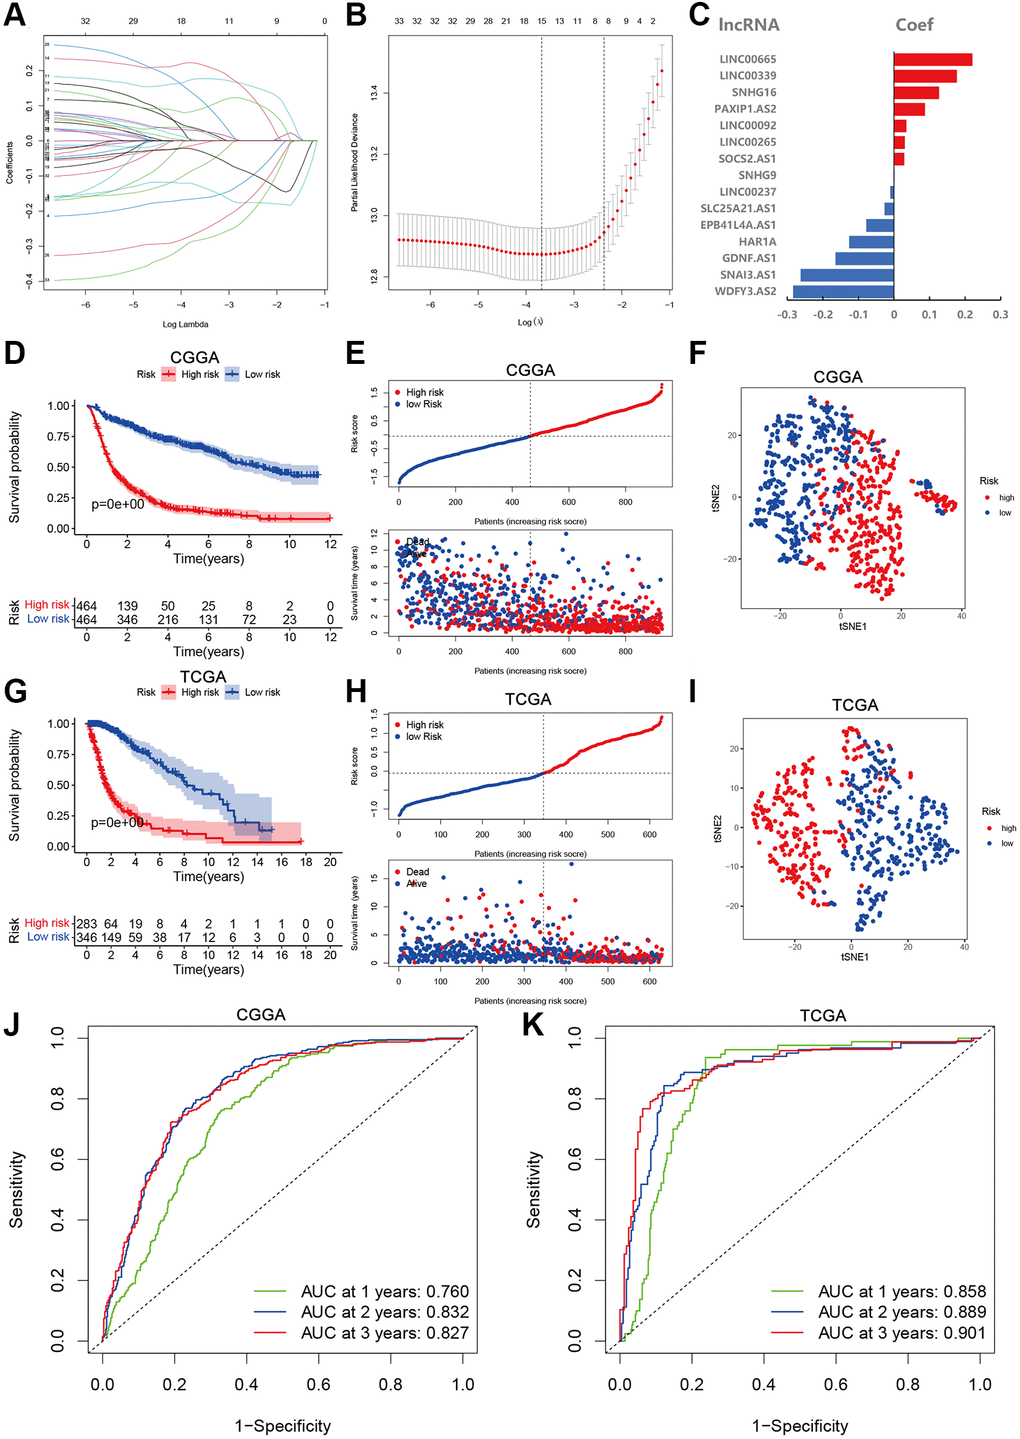 Development and validation of aging-related lncRNAs prognosis signature. (A) LASSO regression of 15 aging-related lncRNAs. (B) Cross-validation for tuning the parameter selection in the LASSO regression. (C) Coefficient of prognosis model regression. (D) Kaplan-Meier curves of high-risk group and low-risk group in CGGA. (E) Distribution of risk score and patients based on the risk score in CGGA. (F) The tSNE2 method showed obvious two components in CGGA. (G) Kaplan-Meier curves of high-risk group and low-risk group in TCGA. (H) Distribution of risk score and patients based on the risk score in TCGA. (I) The tSNE2 method showed obvious two components in TCGA. (J and K) ROC curves of prognostic signature based on risk score in CGGA and TCGA.